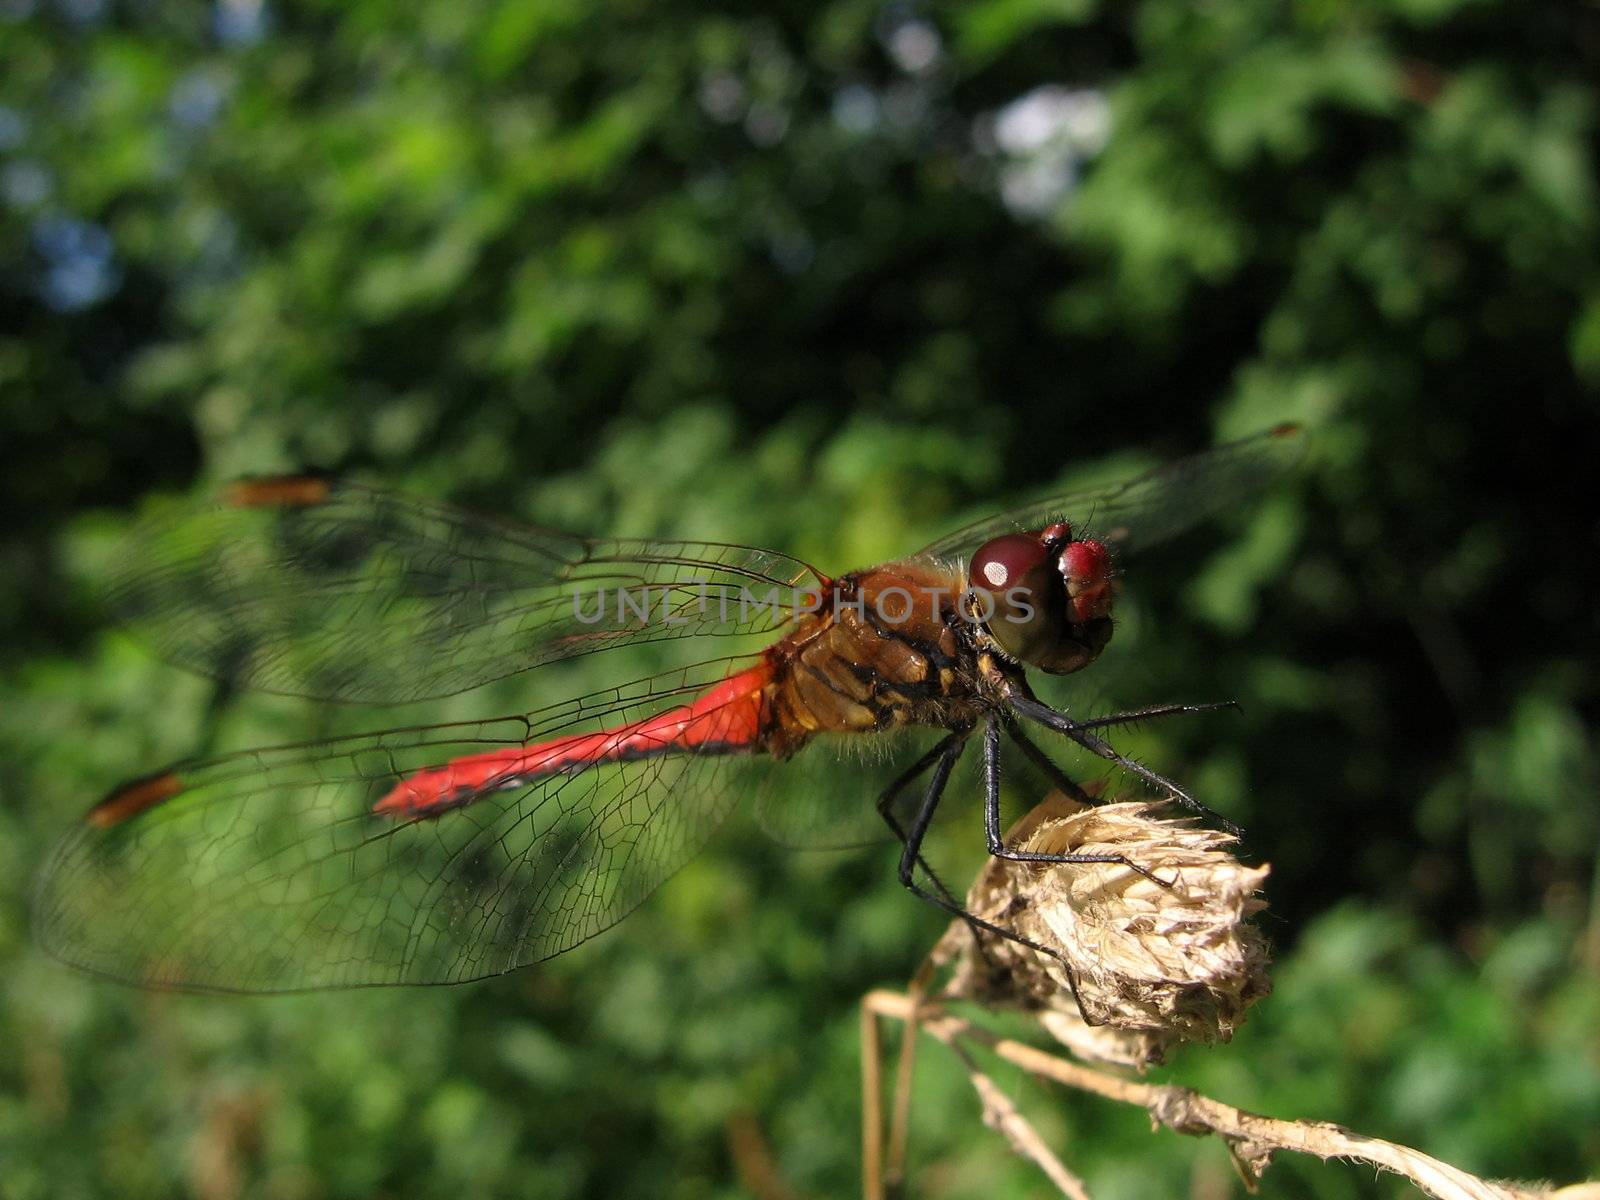 Red dragonfly on stalk by tomatto